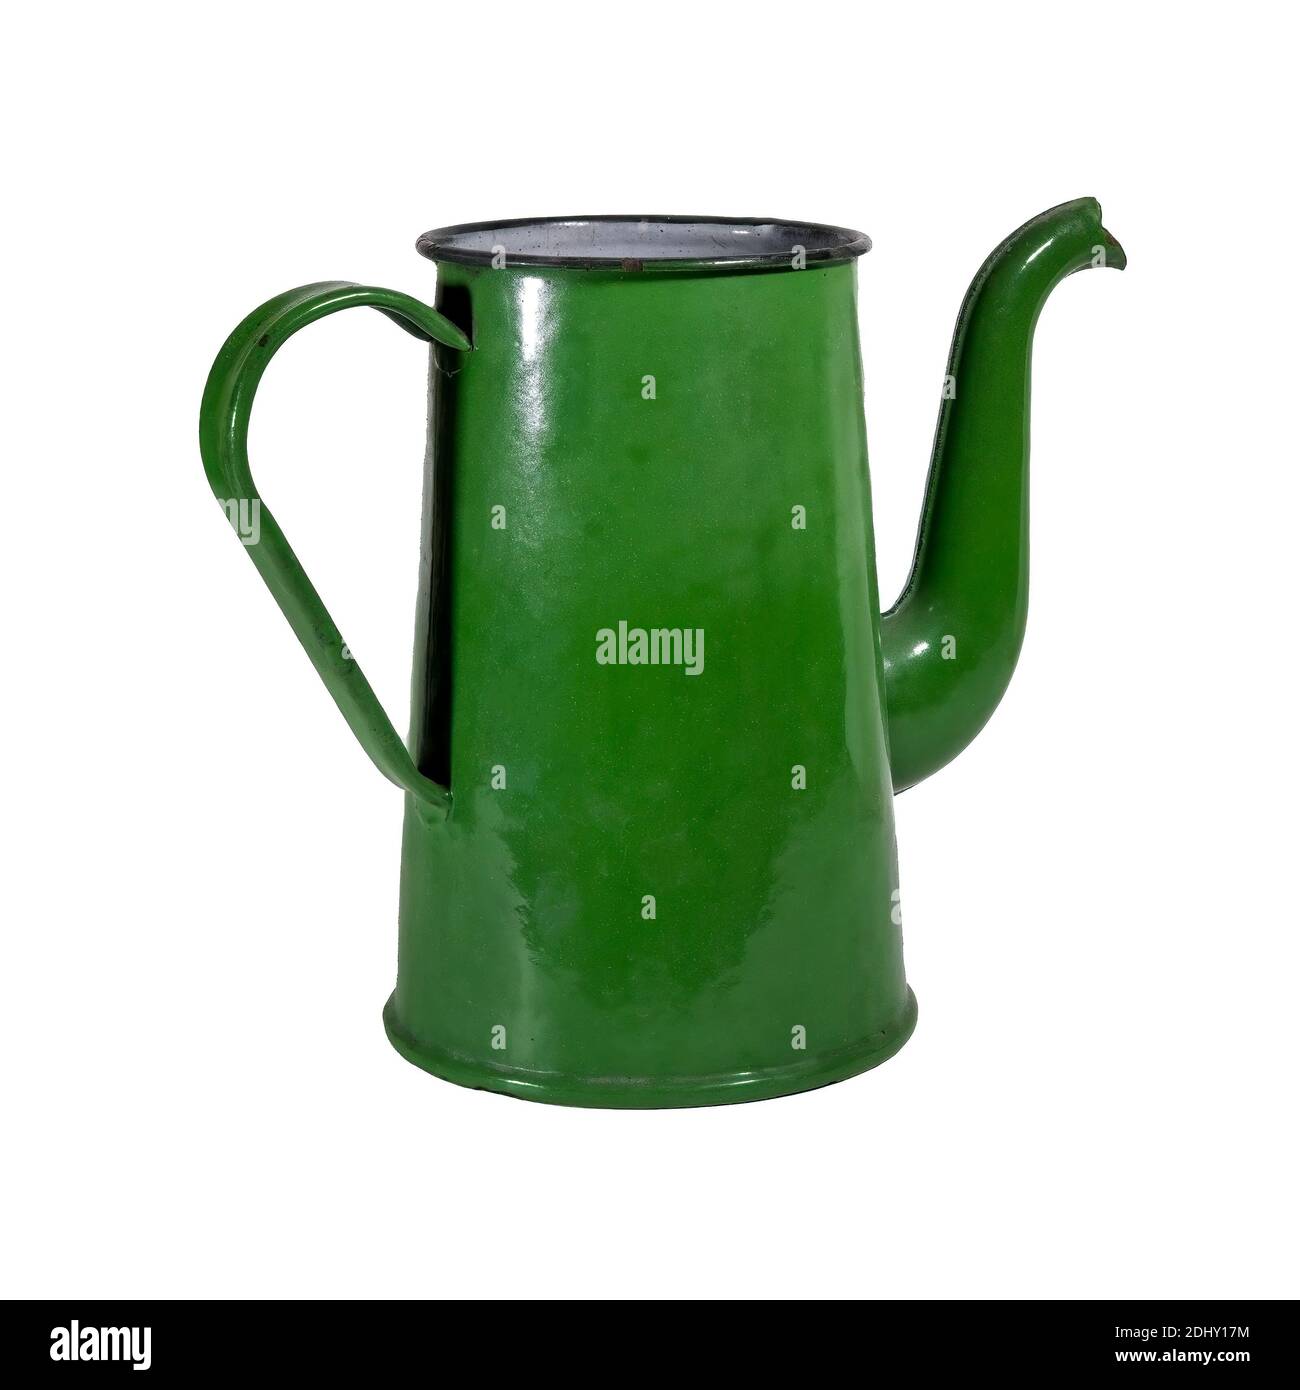 https://c8.alamy.com/comp/2DHY17M/old-metal-enameled-tea-coffee-pot-of-green-color-isolate-on-a-white-background-vintage-soviet-enamel-teapot-2DHY17M.jpg